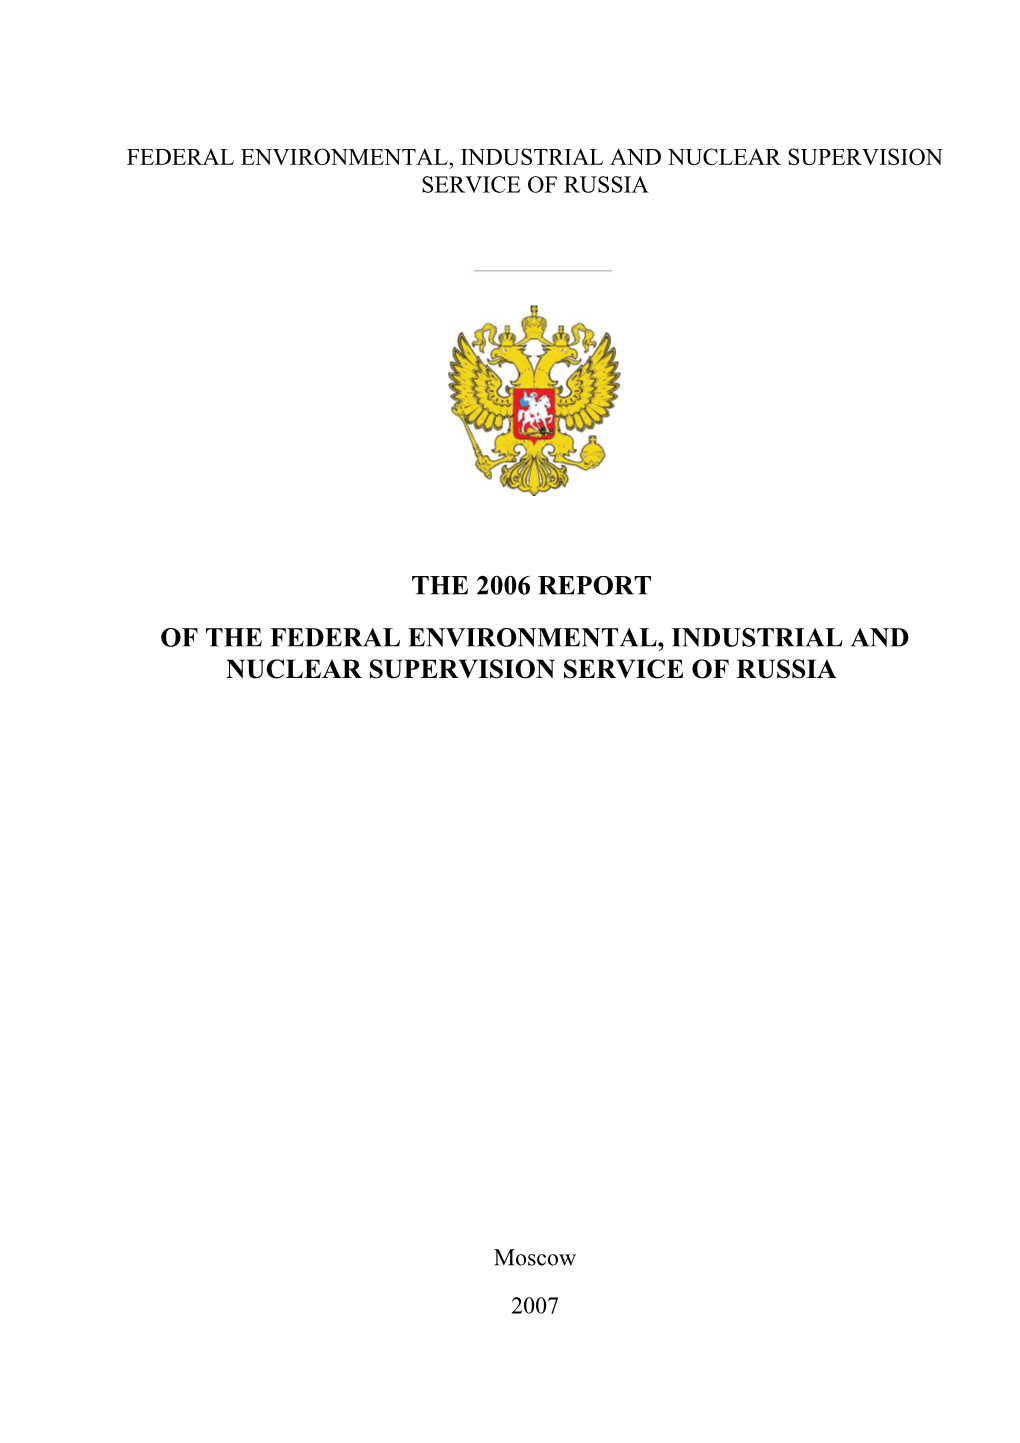 Of the Federal Environmental, Industrial and Nuclear Supervision Service of Russia